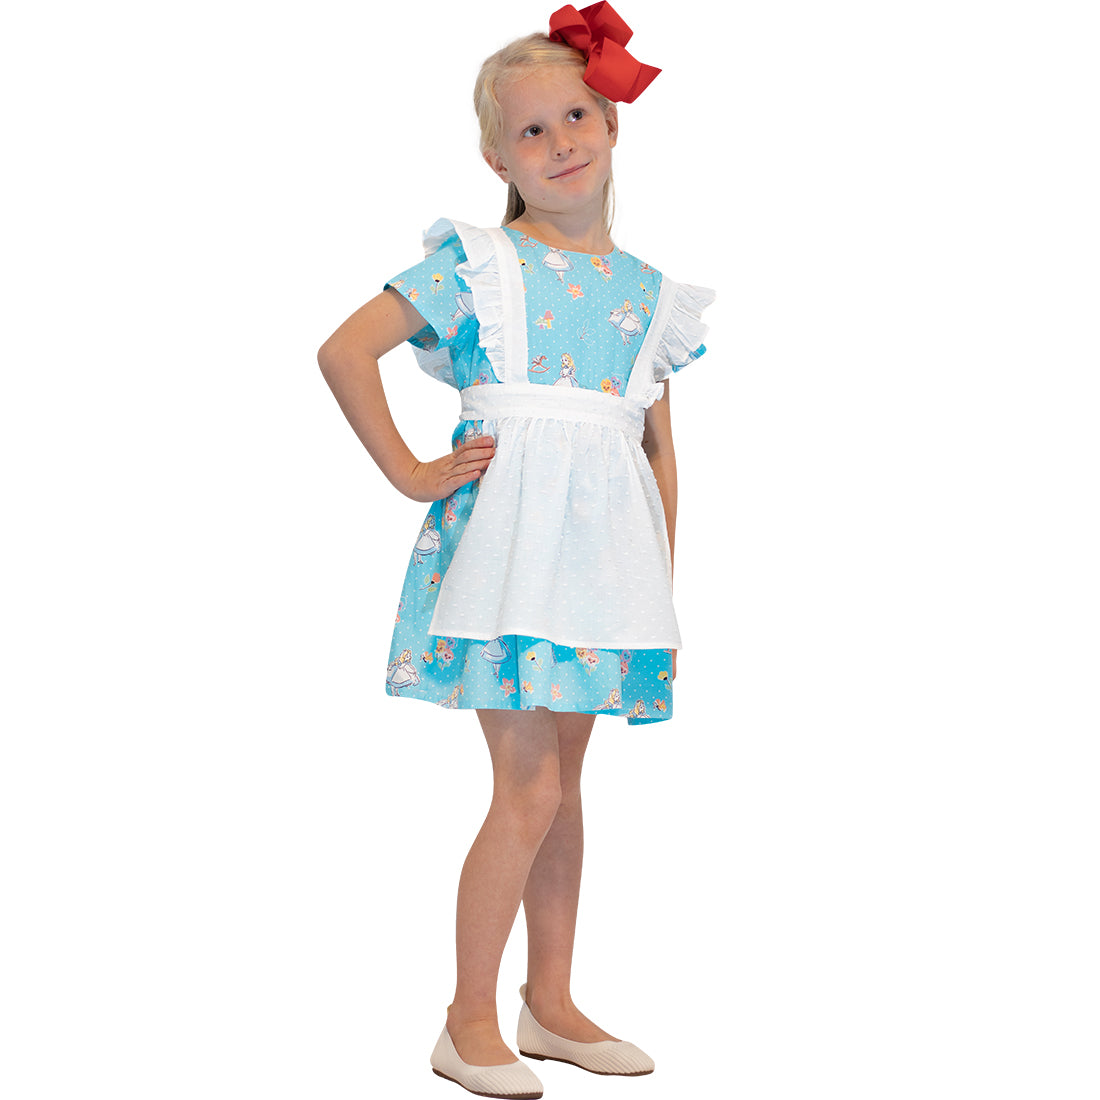 Alice Baby Dress, Blue Girl Dress, Wonderland Toddler Dress, Cosplay Costume, Dress with Apron, Easter, Eid, Birthday Party Dress